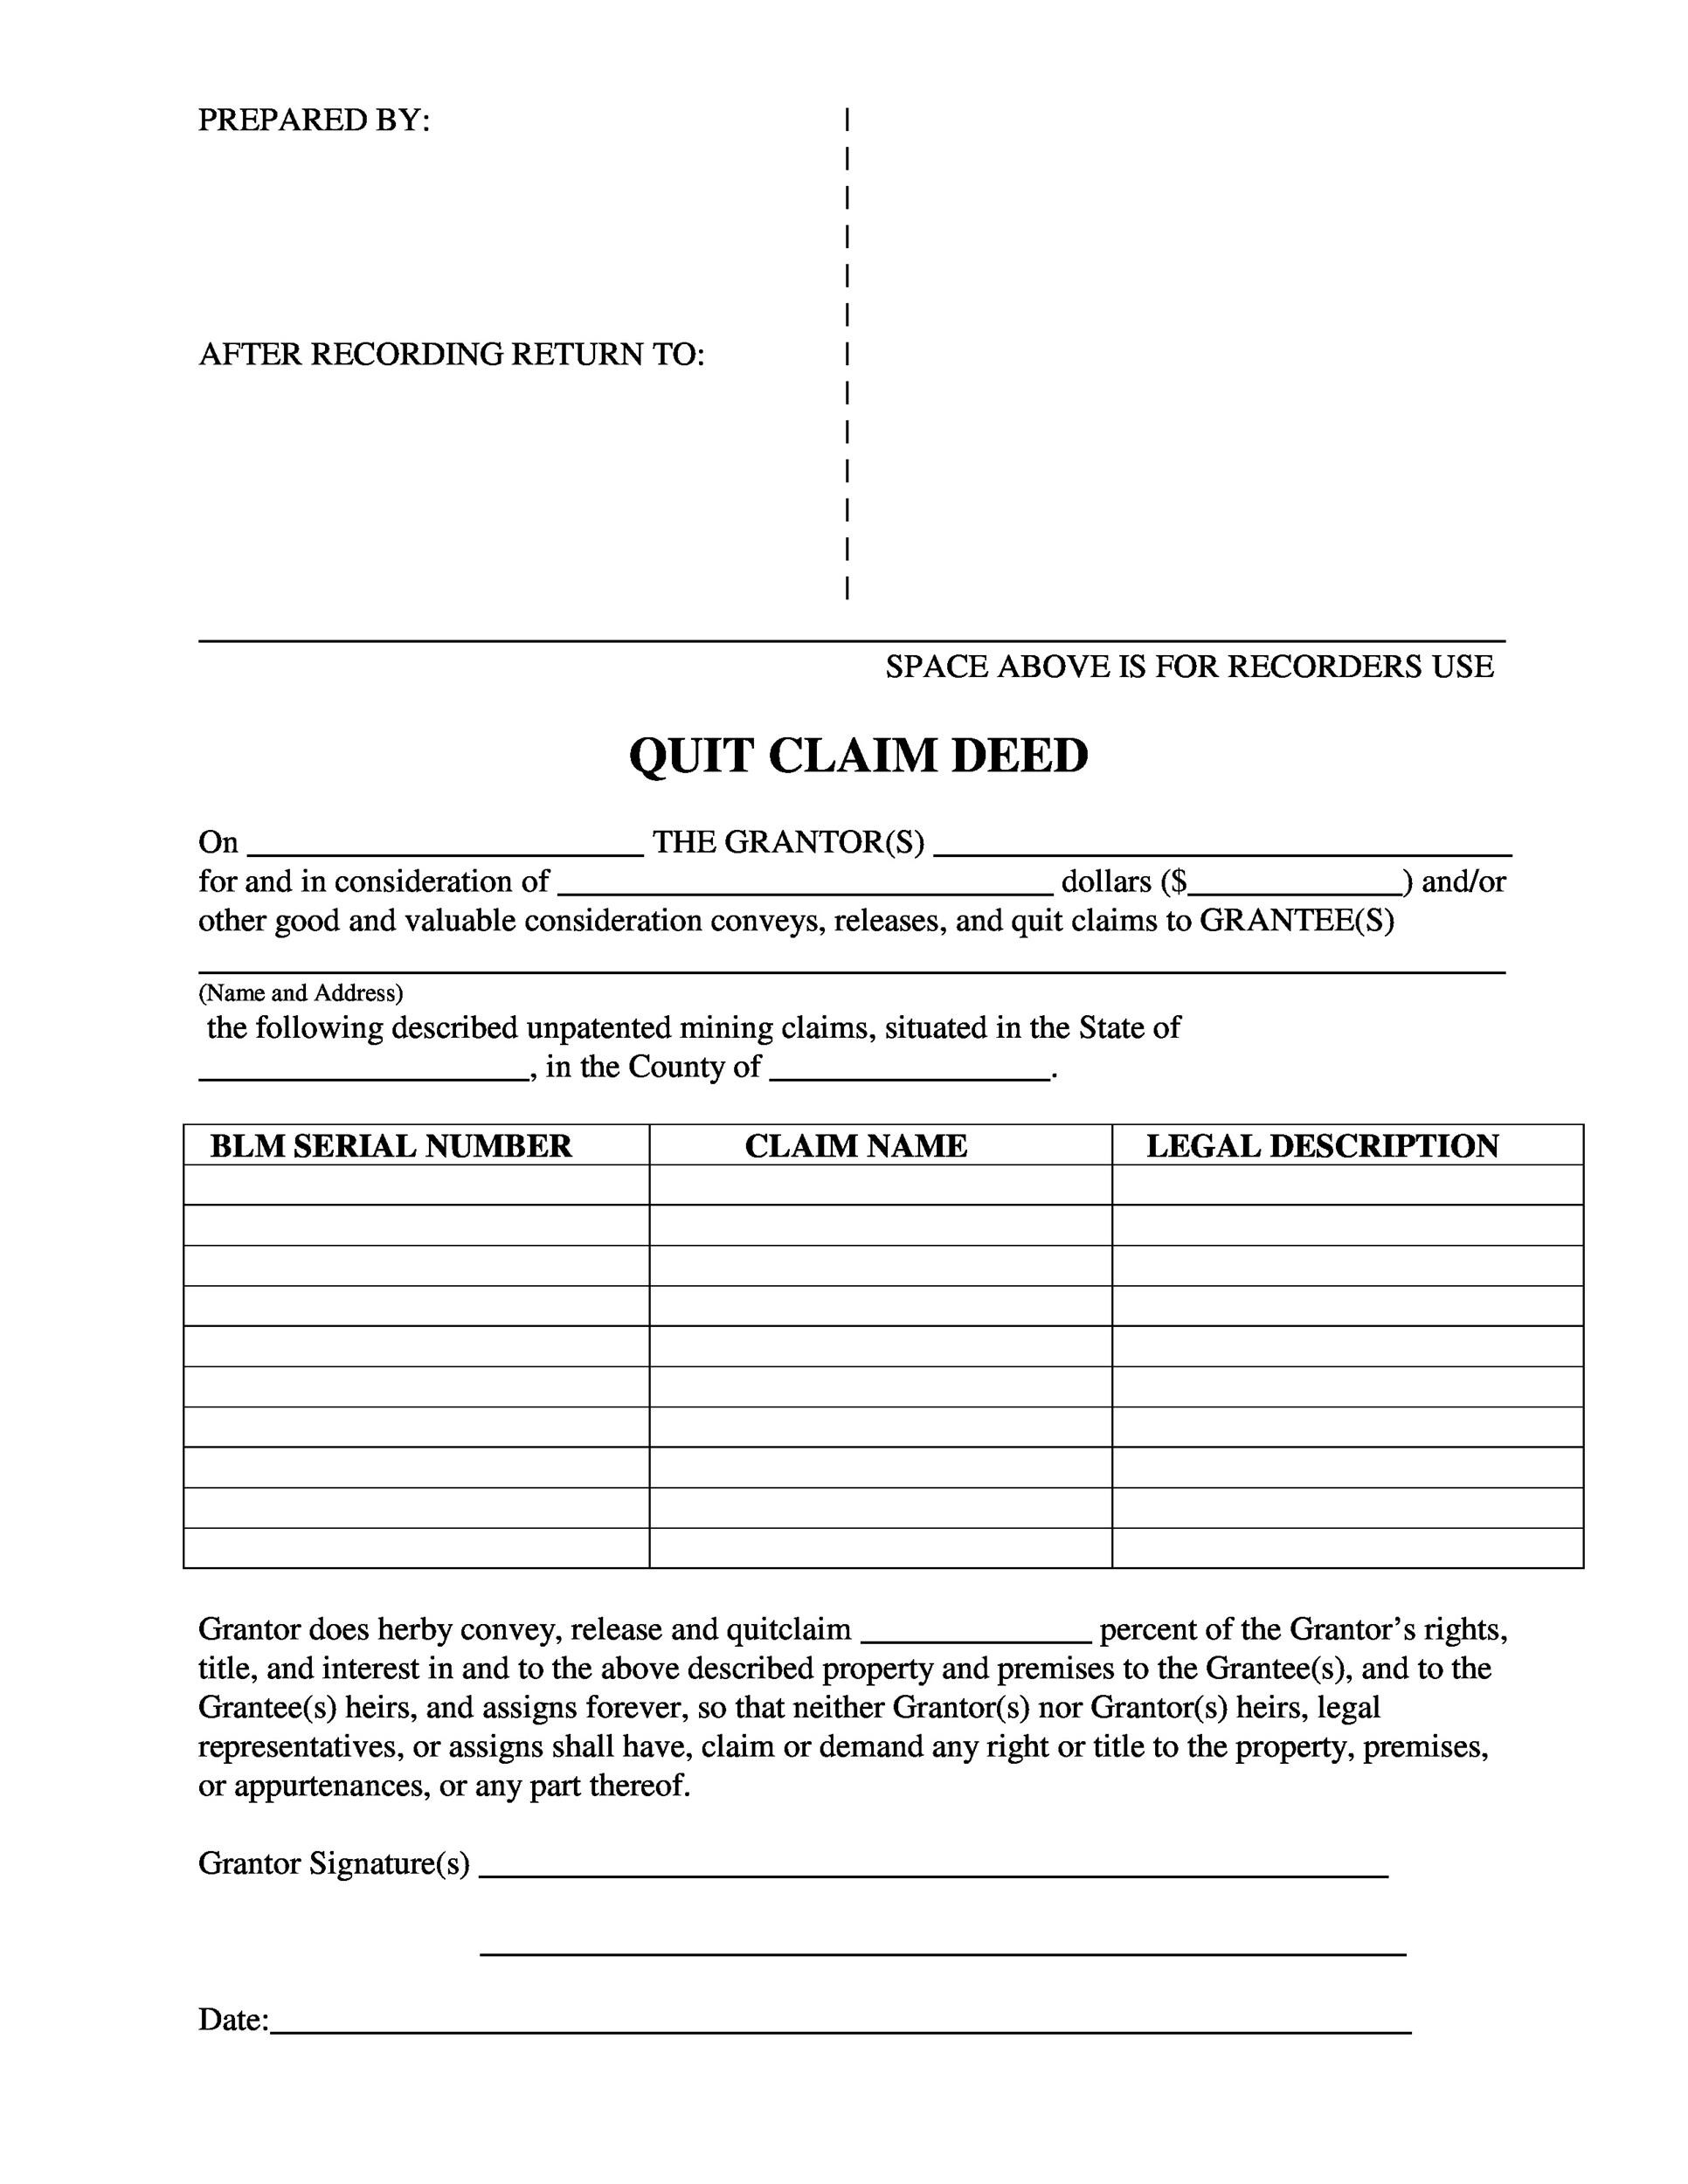 wisconsin-quit-claim-deed-free-printable-legal-forms